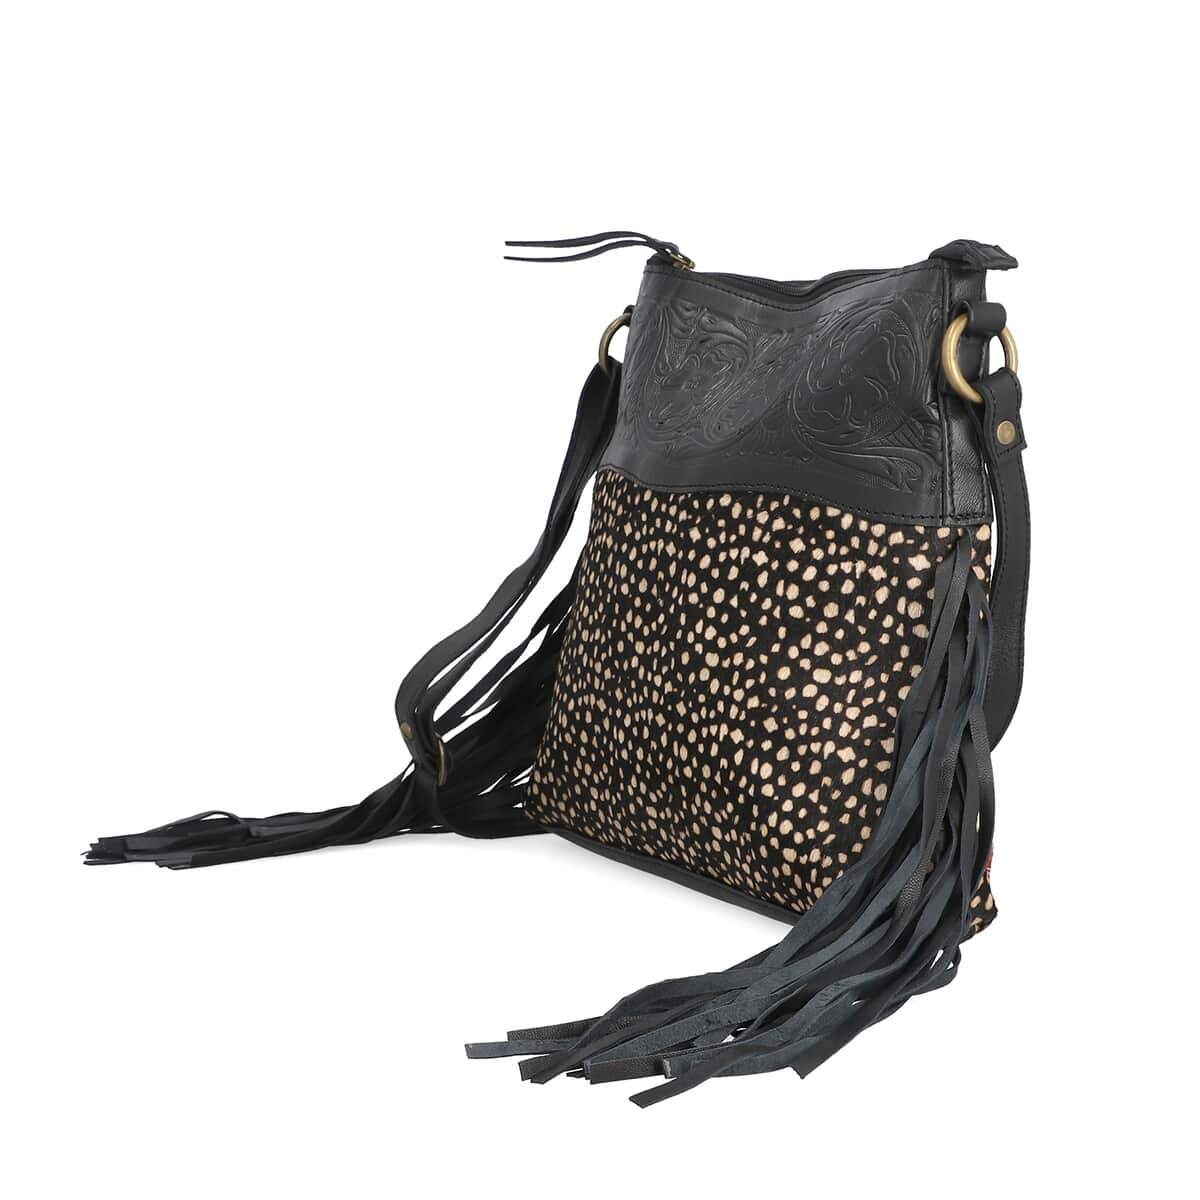 Black and White Genuine Leather Hair on Shoulder Bag with Fringes (11"x2"x11") image number 2